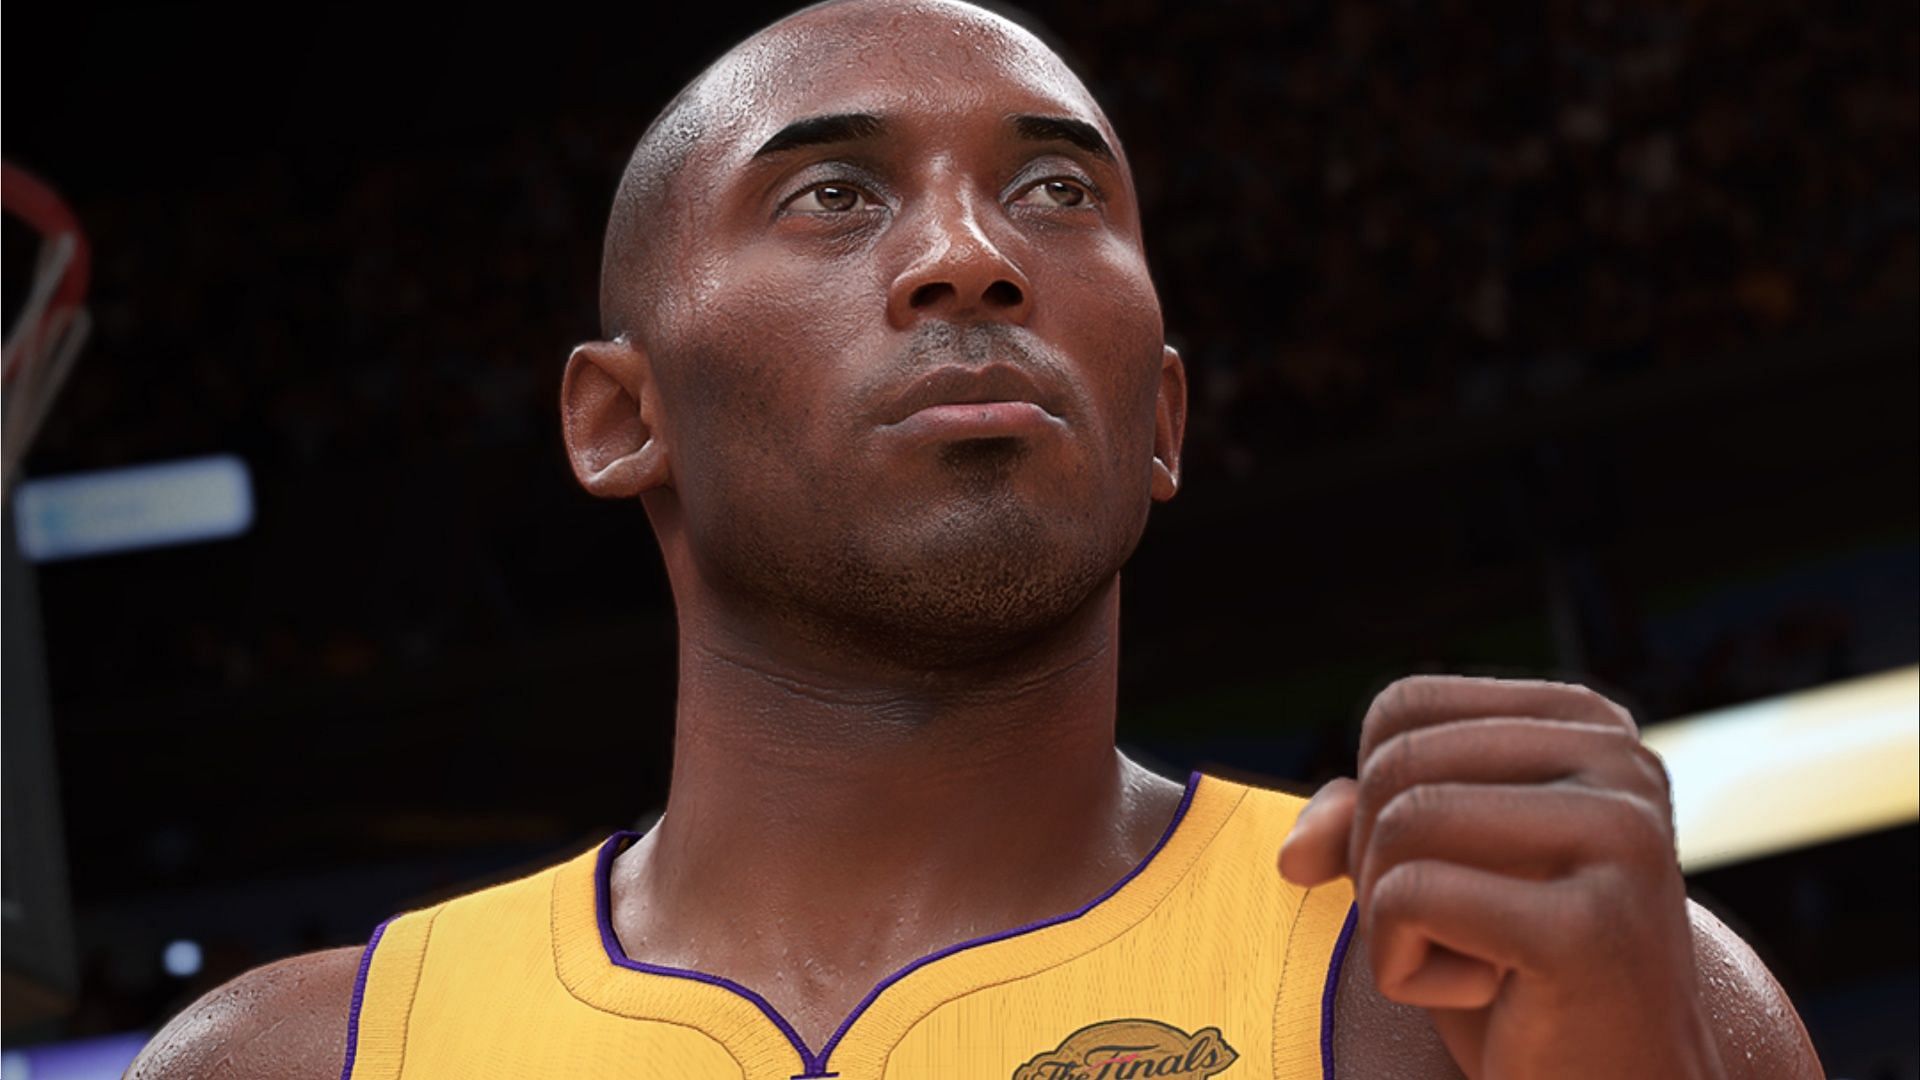 NBA 2K24 has confirmed Bryant as the face of the game (image via 2K Sports)